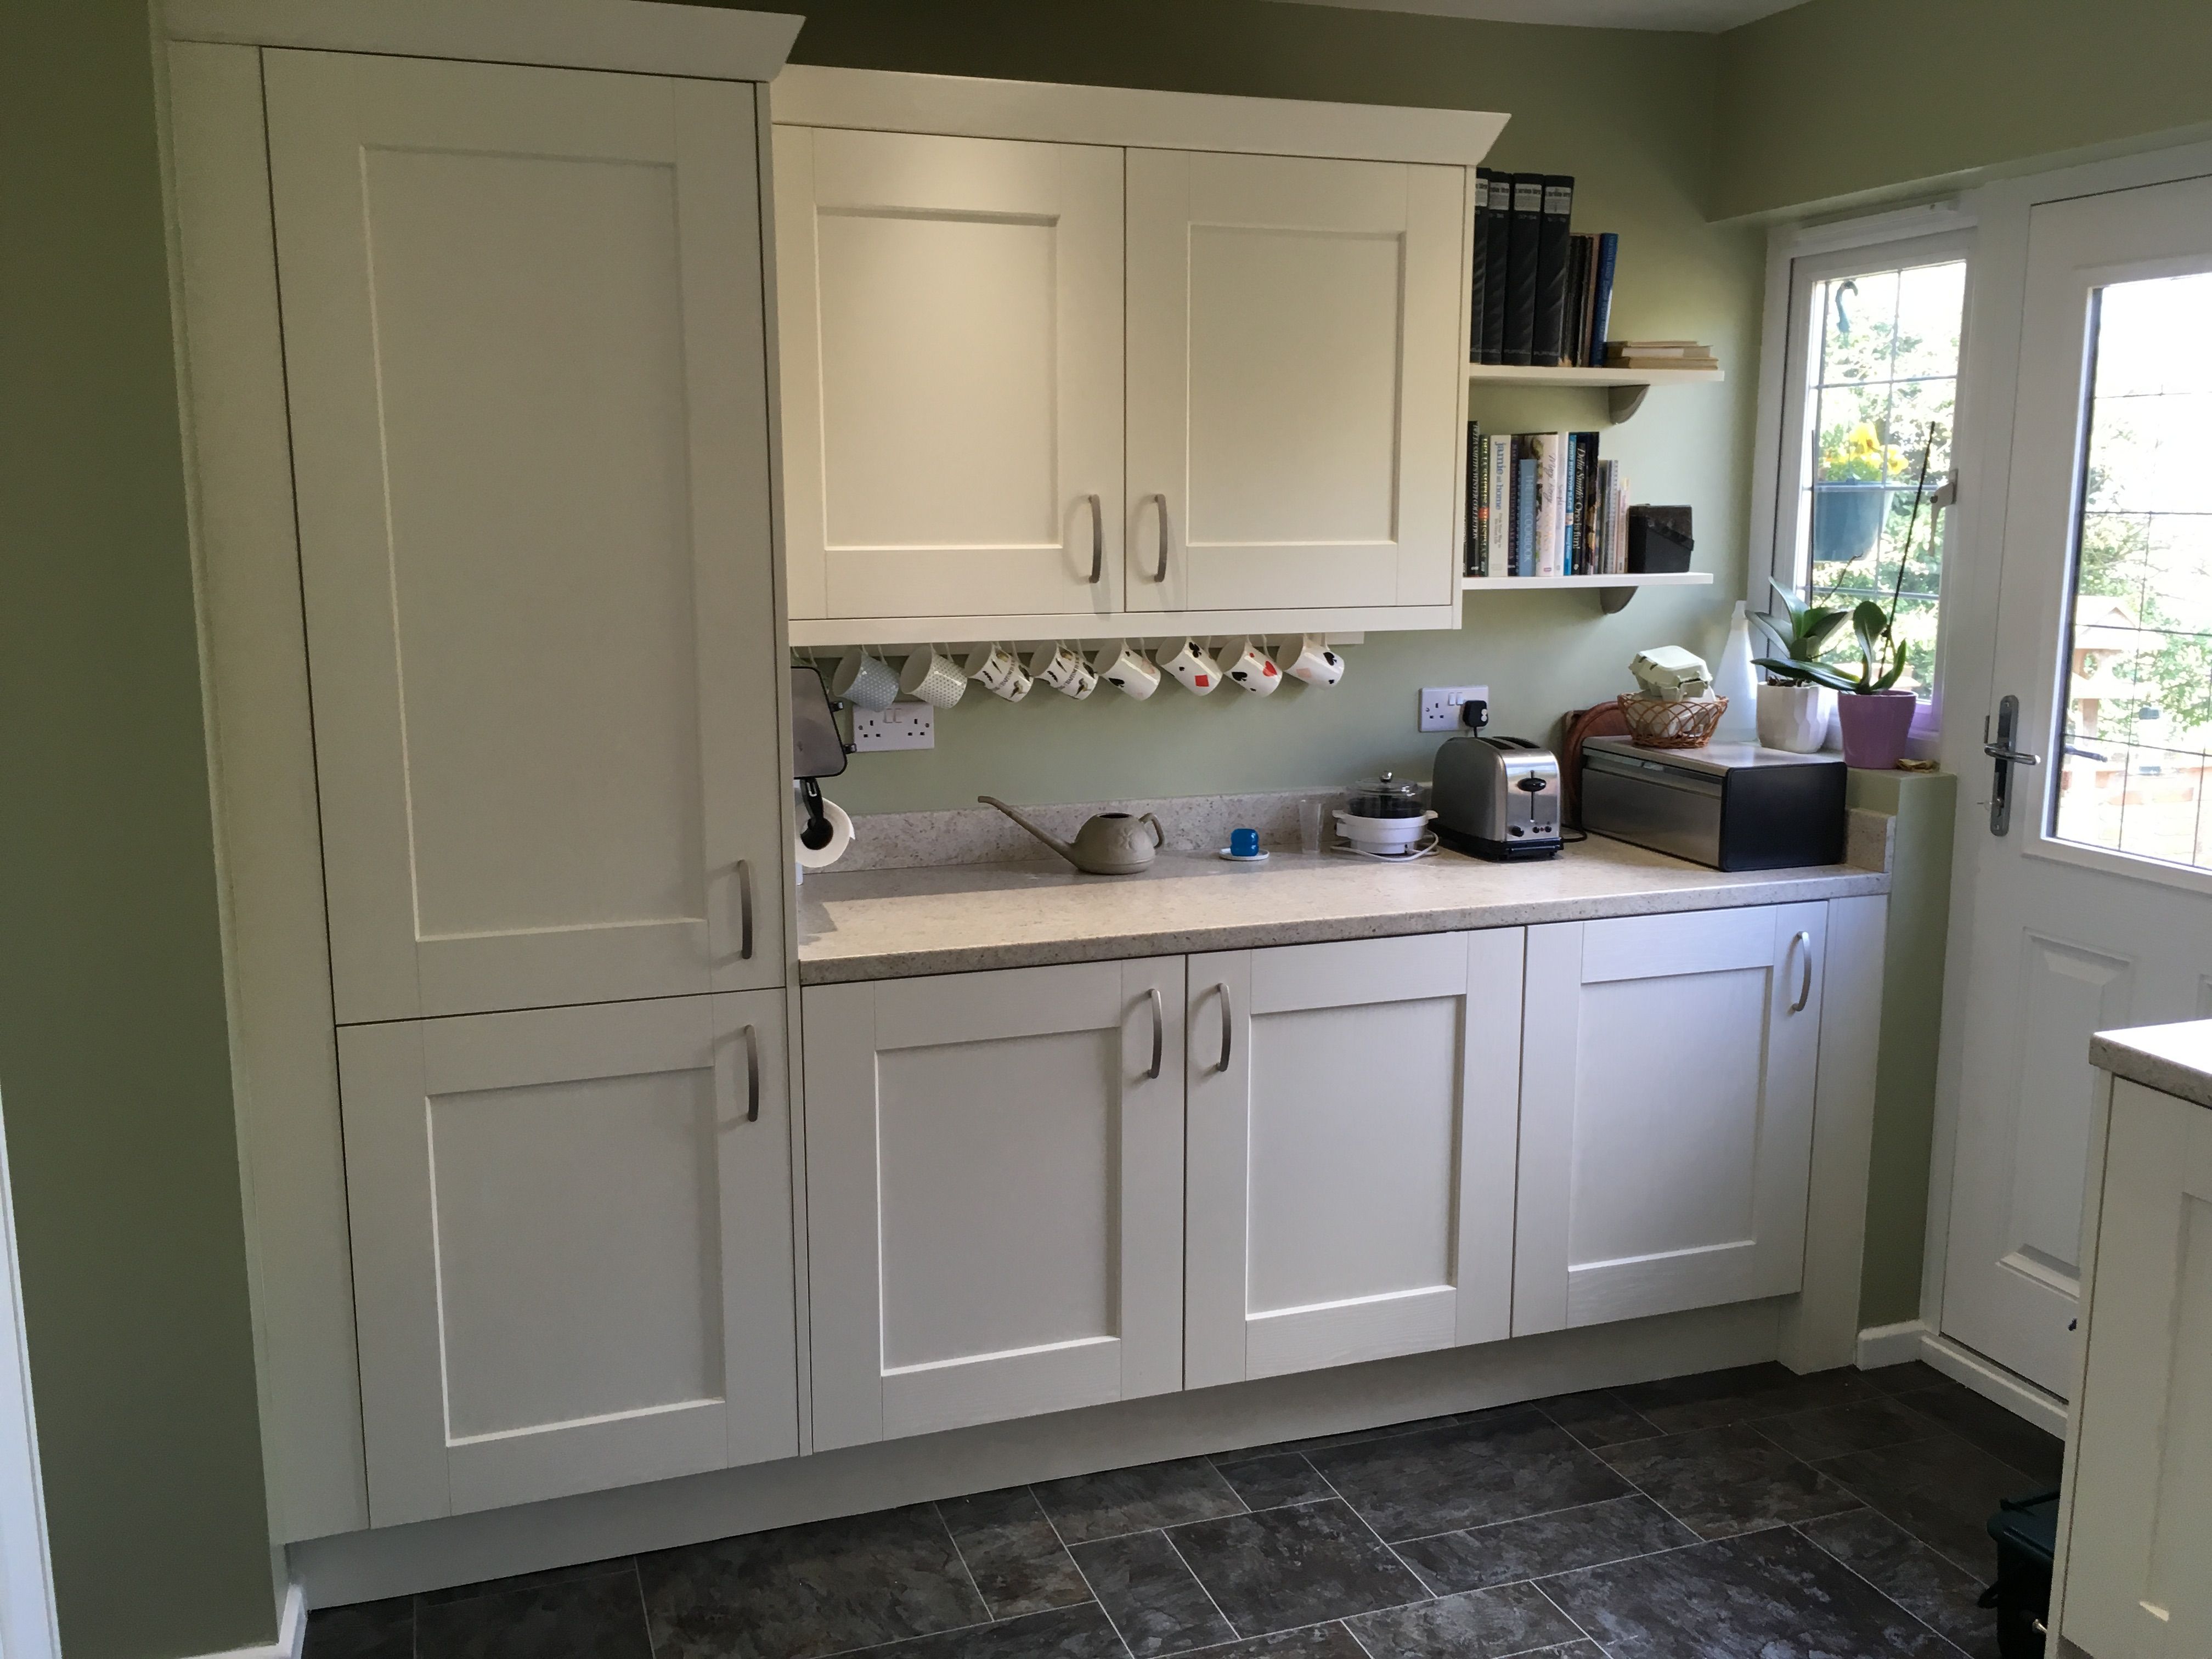 Essex Kitchens Bathrooms And Bedrooms Our Work 3 Bca8dc5b 